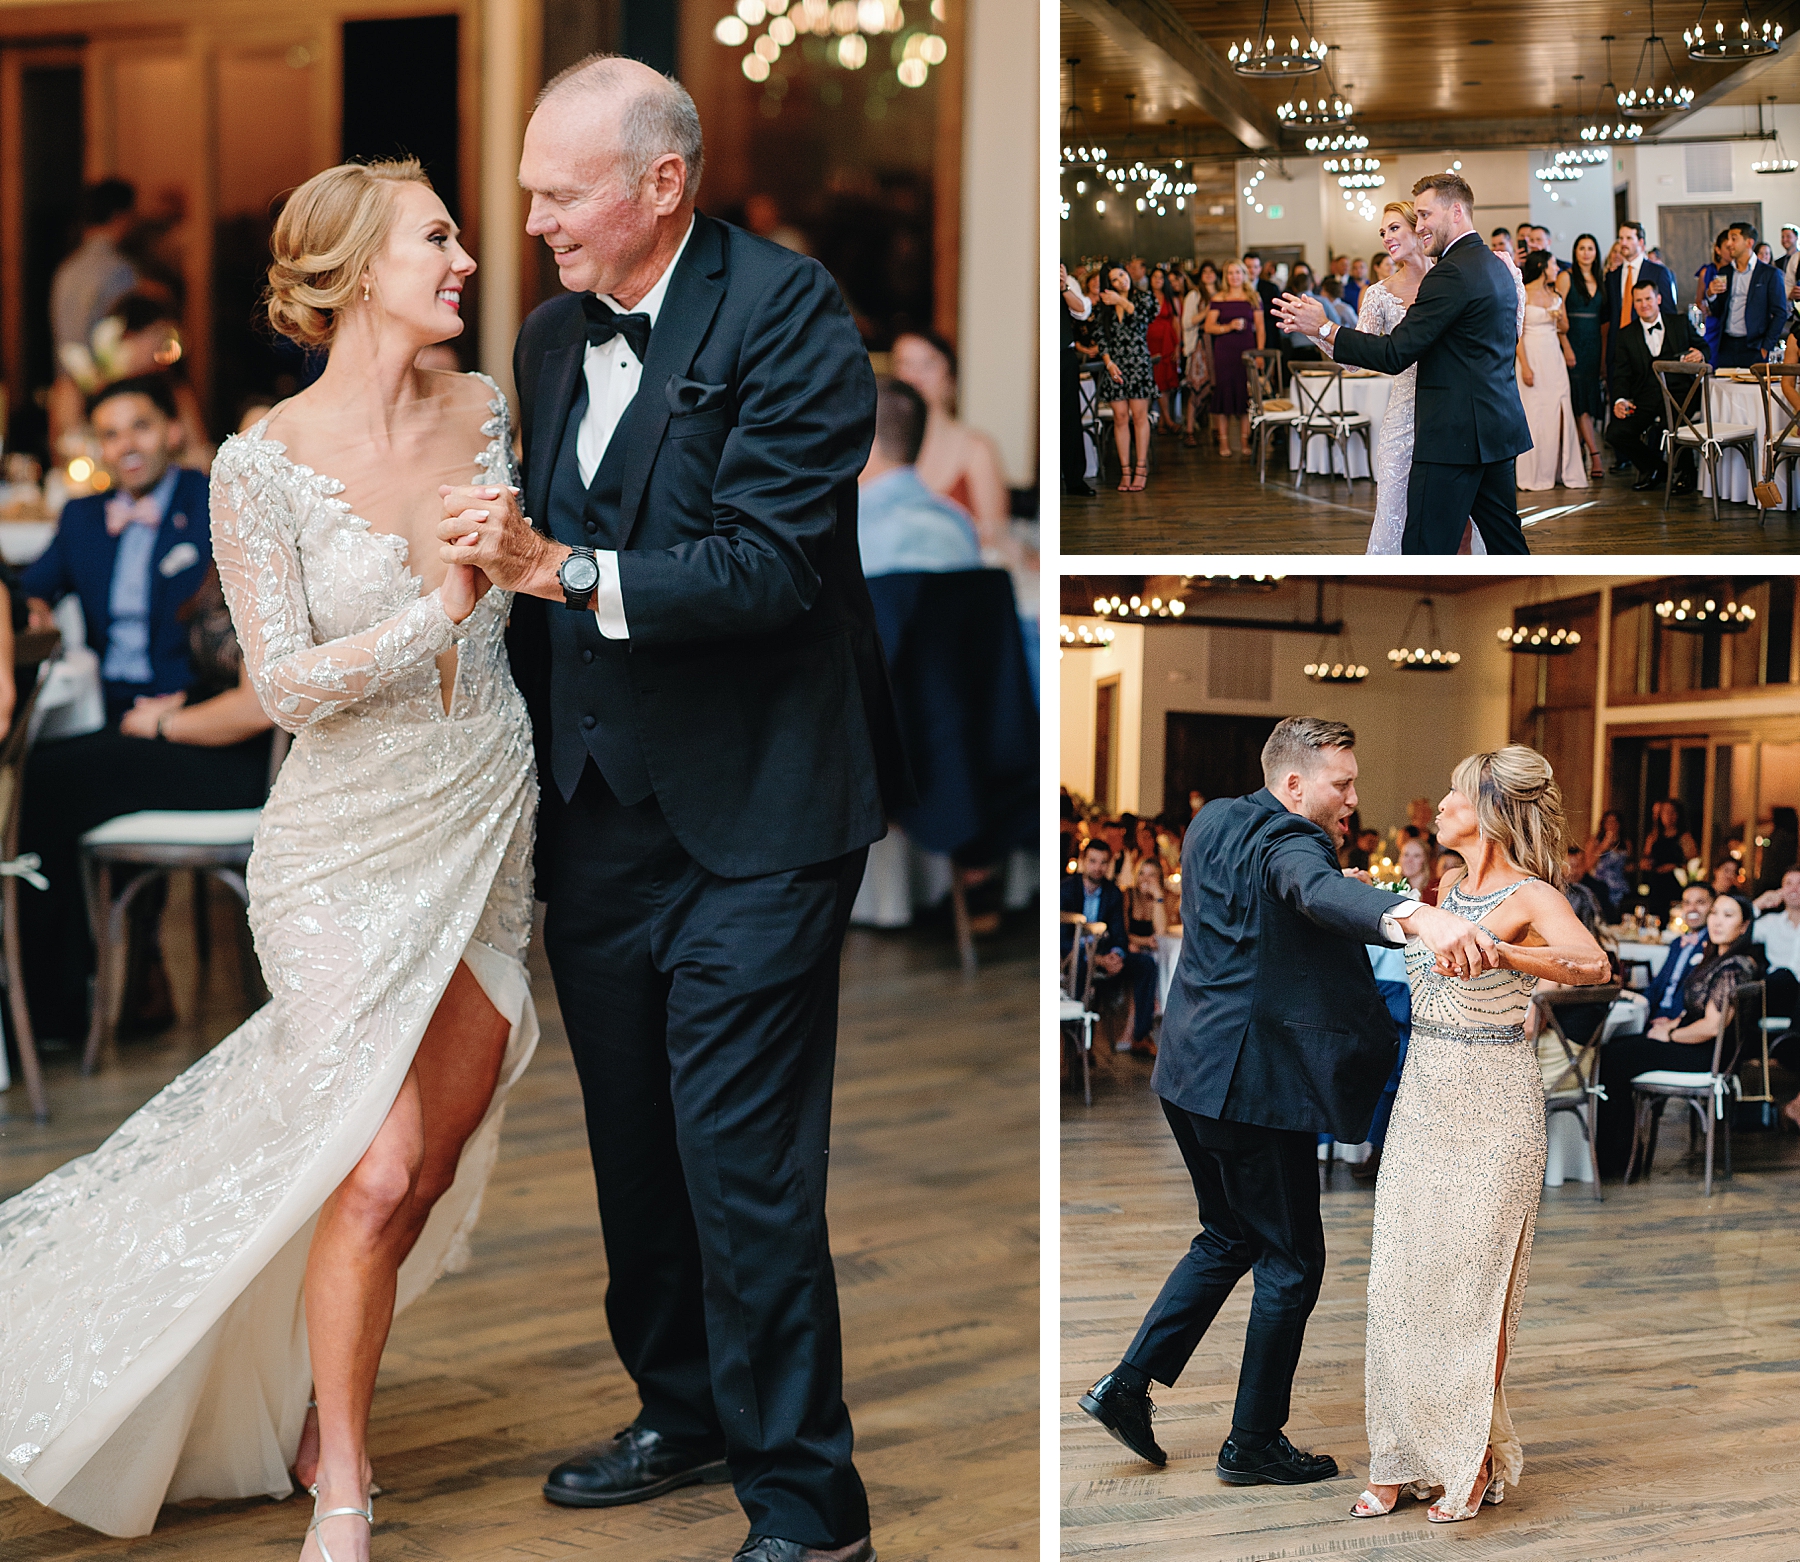 First dances at The Boulders at Black Canyon Inn